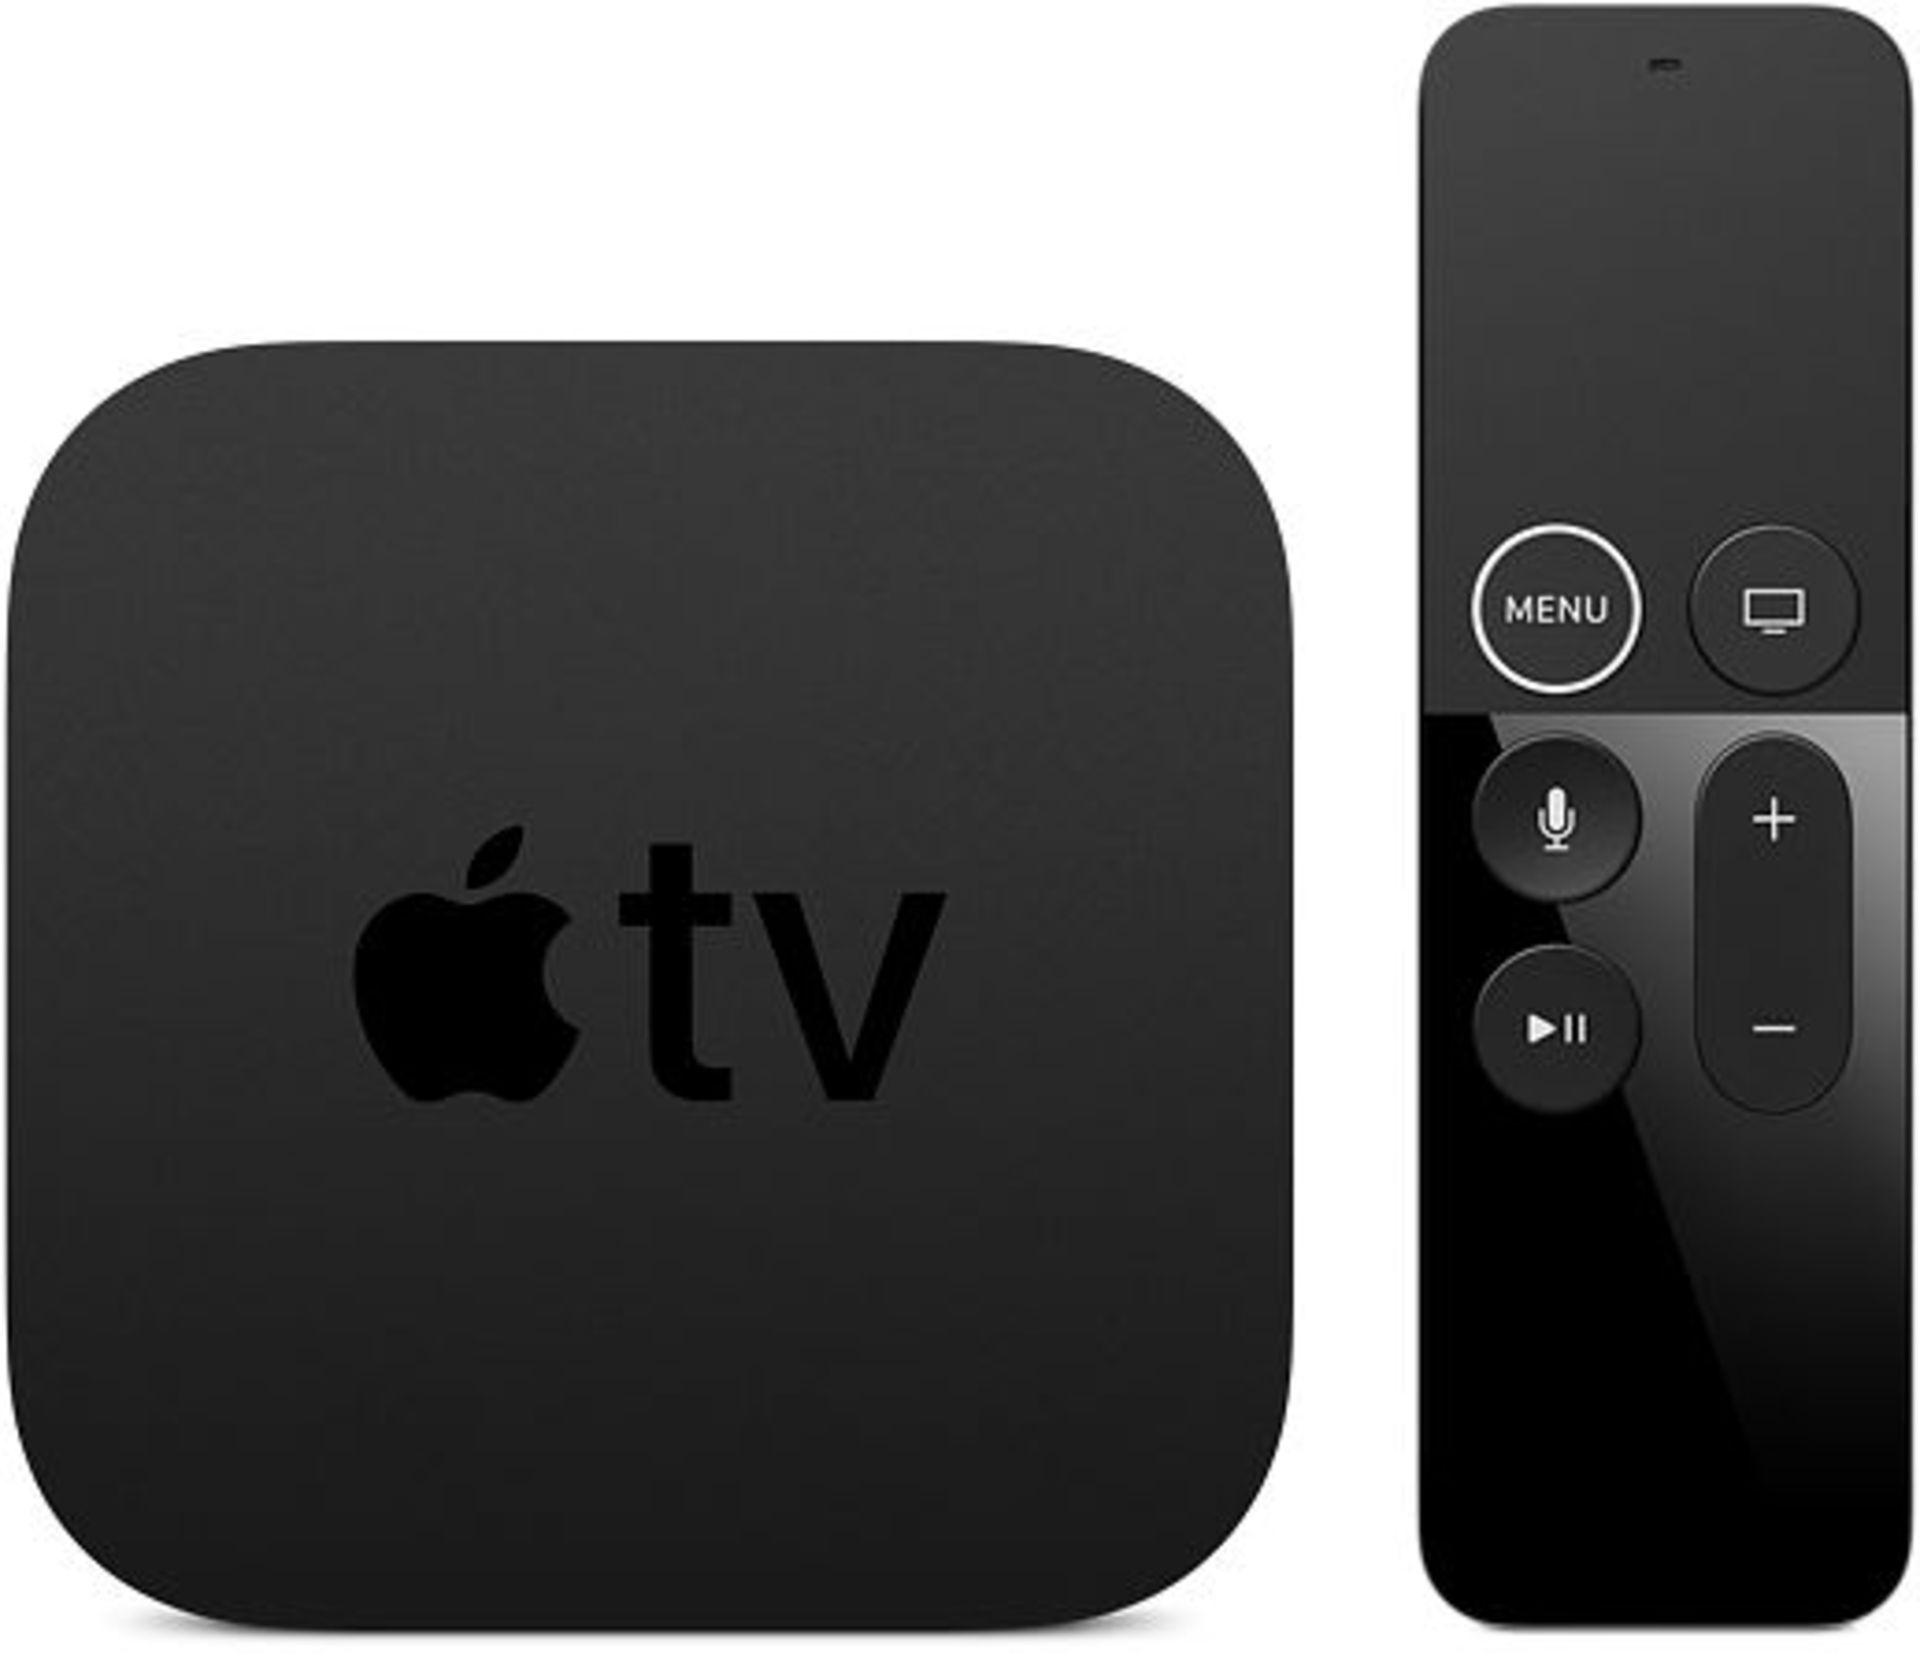 1 x Apple TV Unit With Original Box and Remote Control - 32gb Storage Capacity - Model MGYS2LL/A -